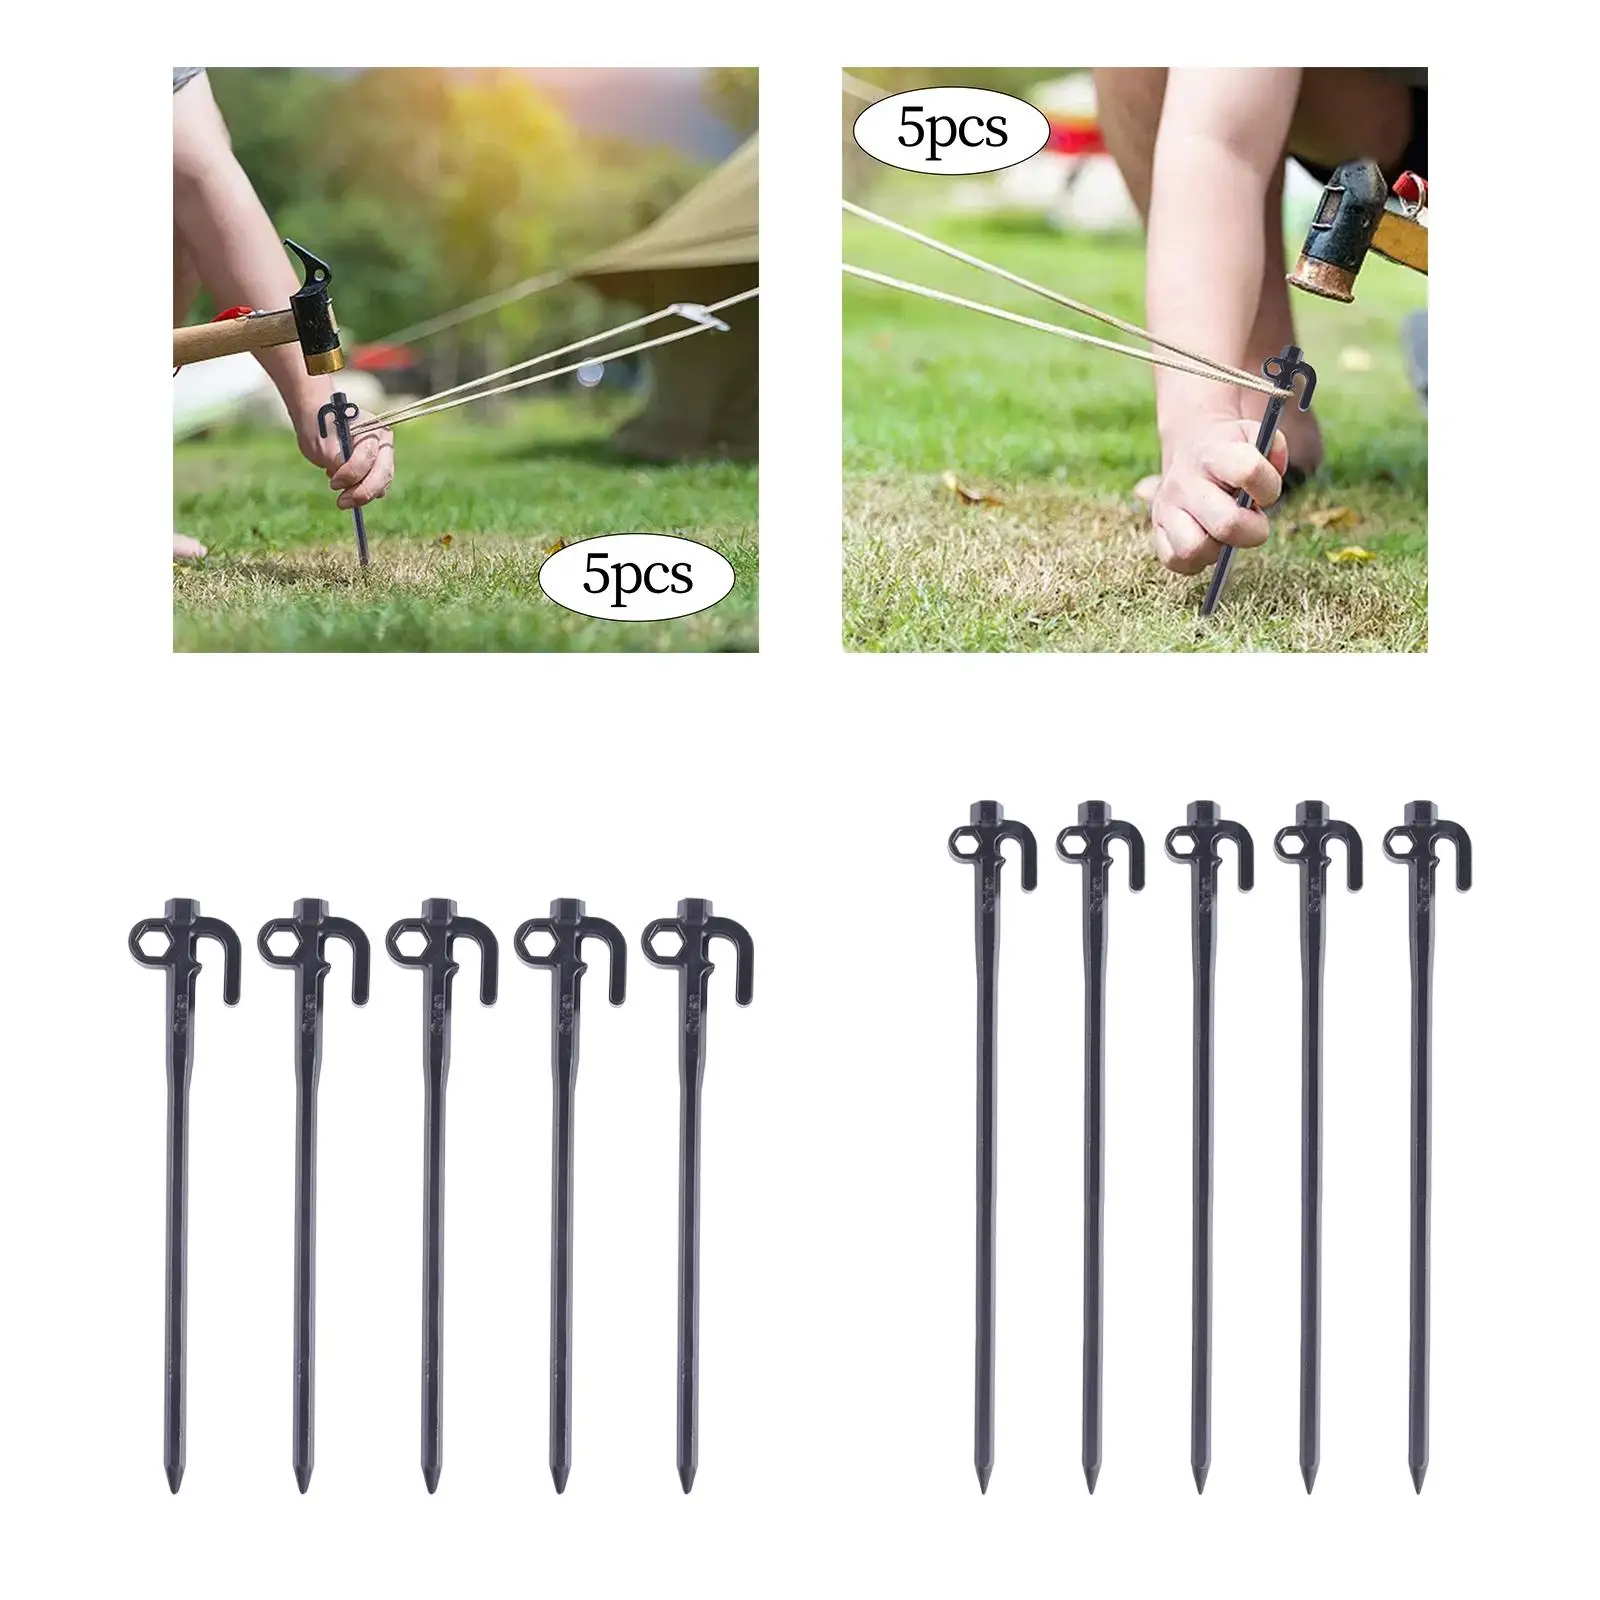 5 Pieces Camping Tent Nails Sand Anchor Nail for Car Snowfield Grassland